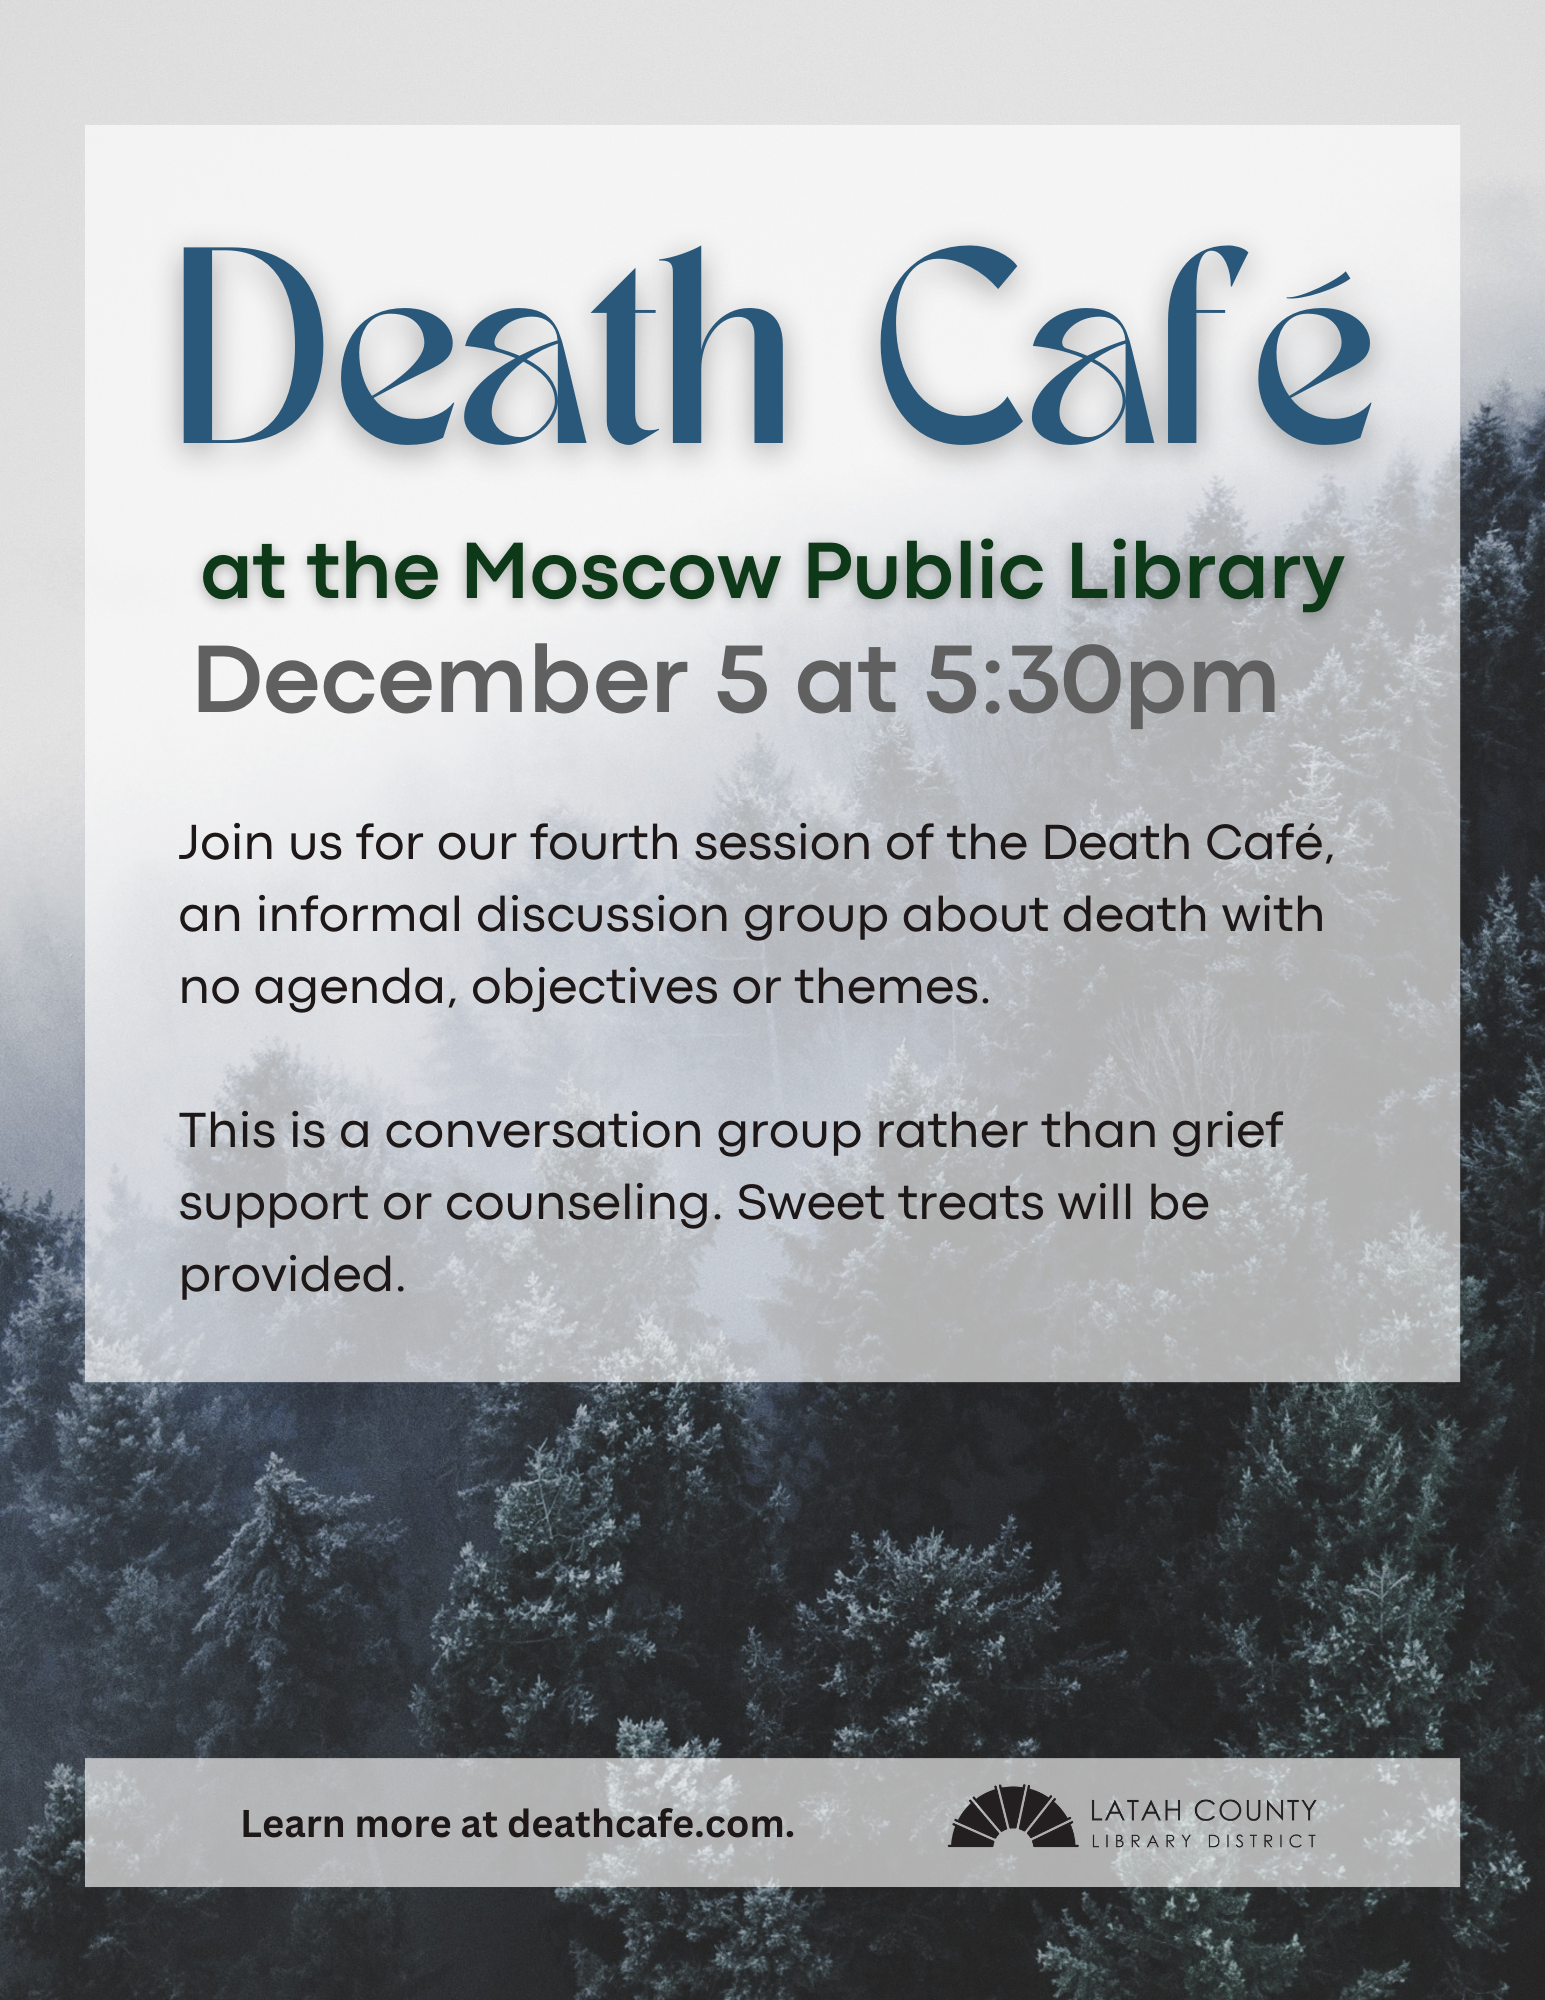 Death Café at the Moscow Public Library